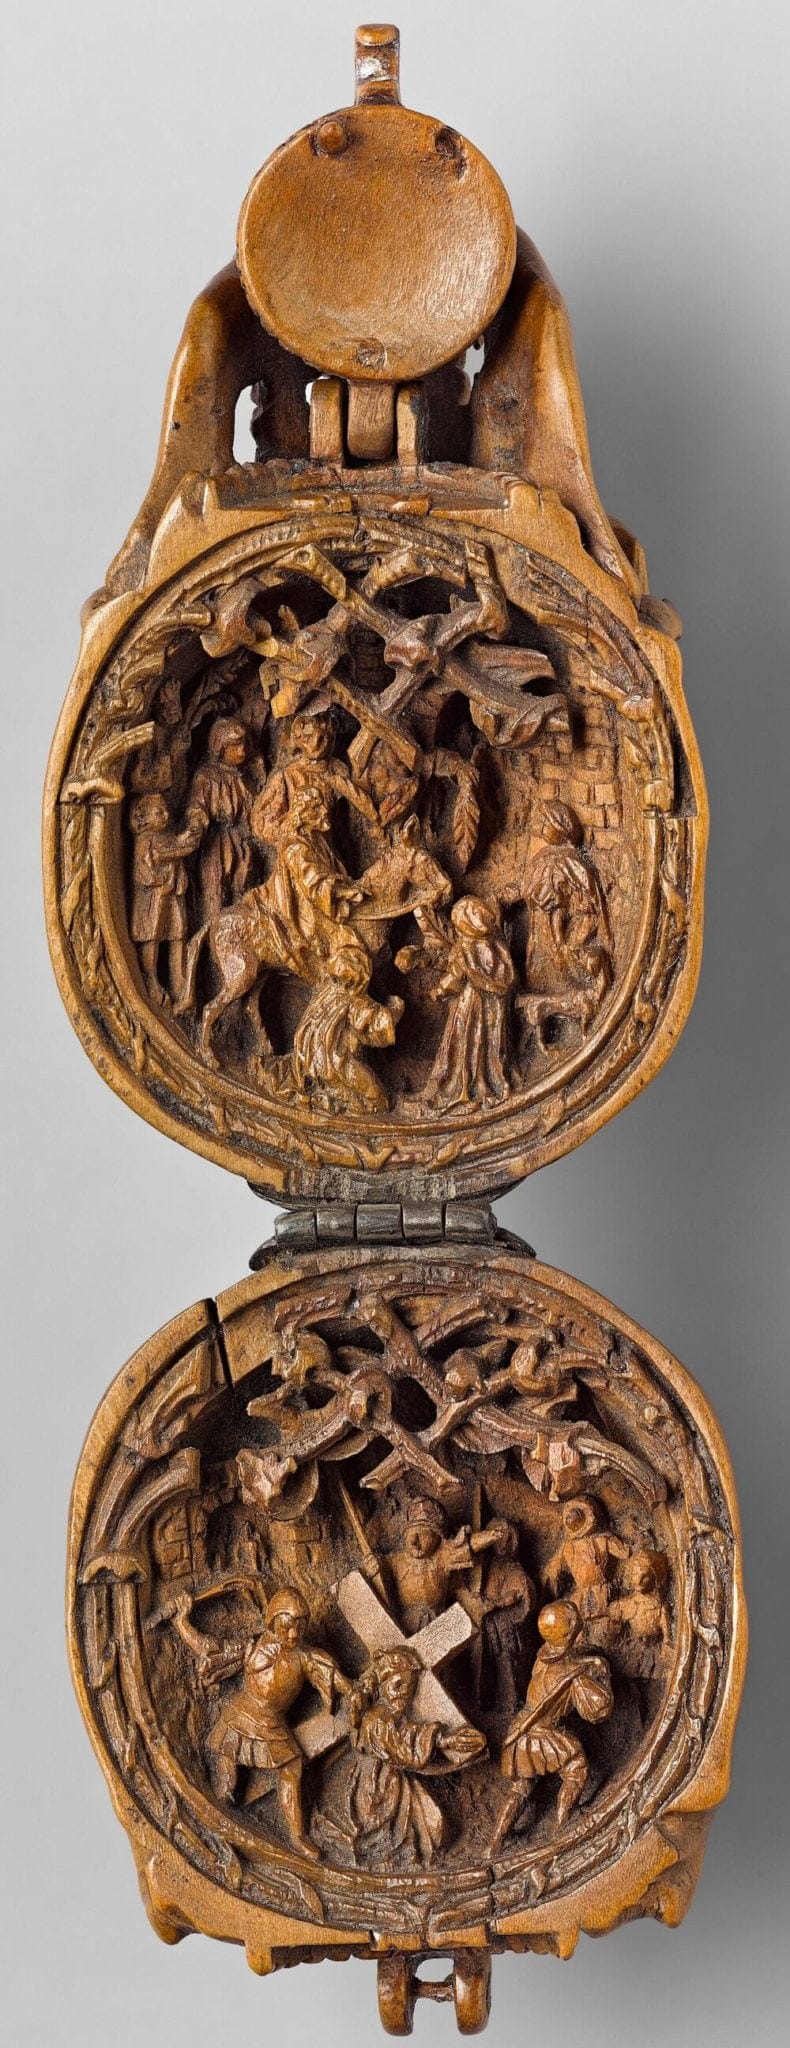 Beautifully Intricate Tiny Boxwood Carvings From The 16th Century (3)